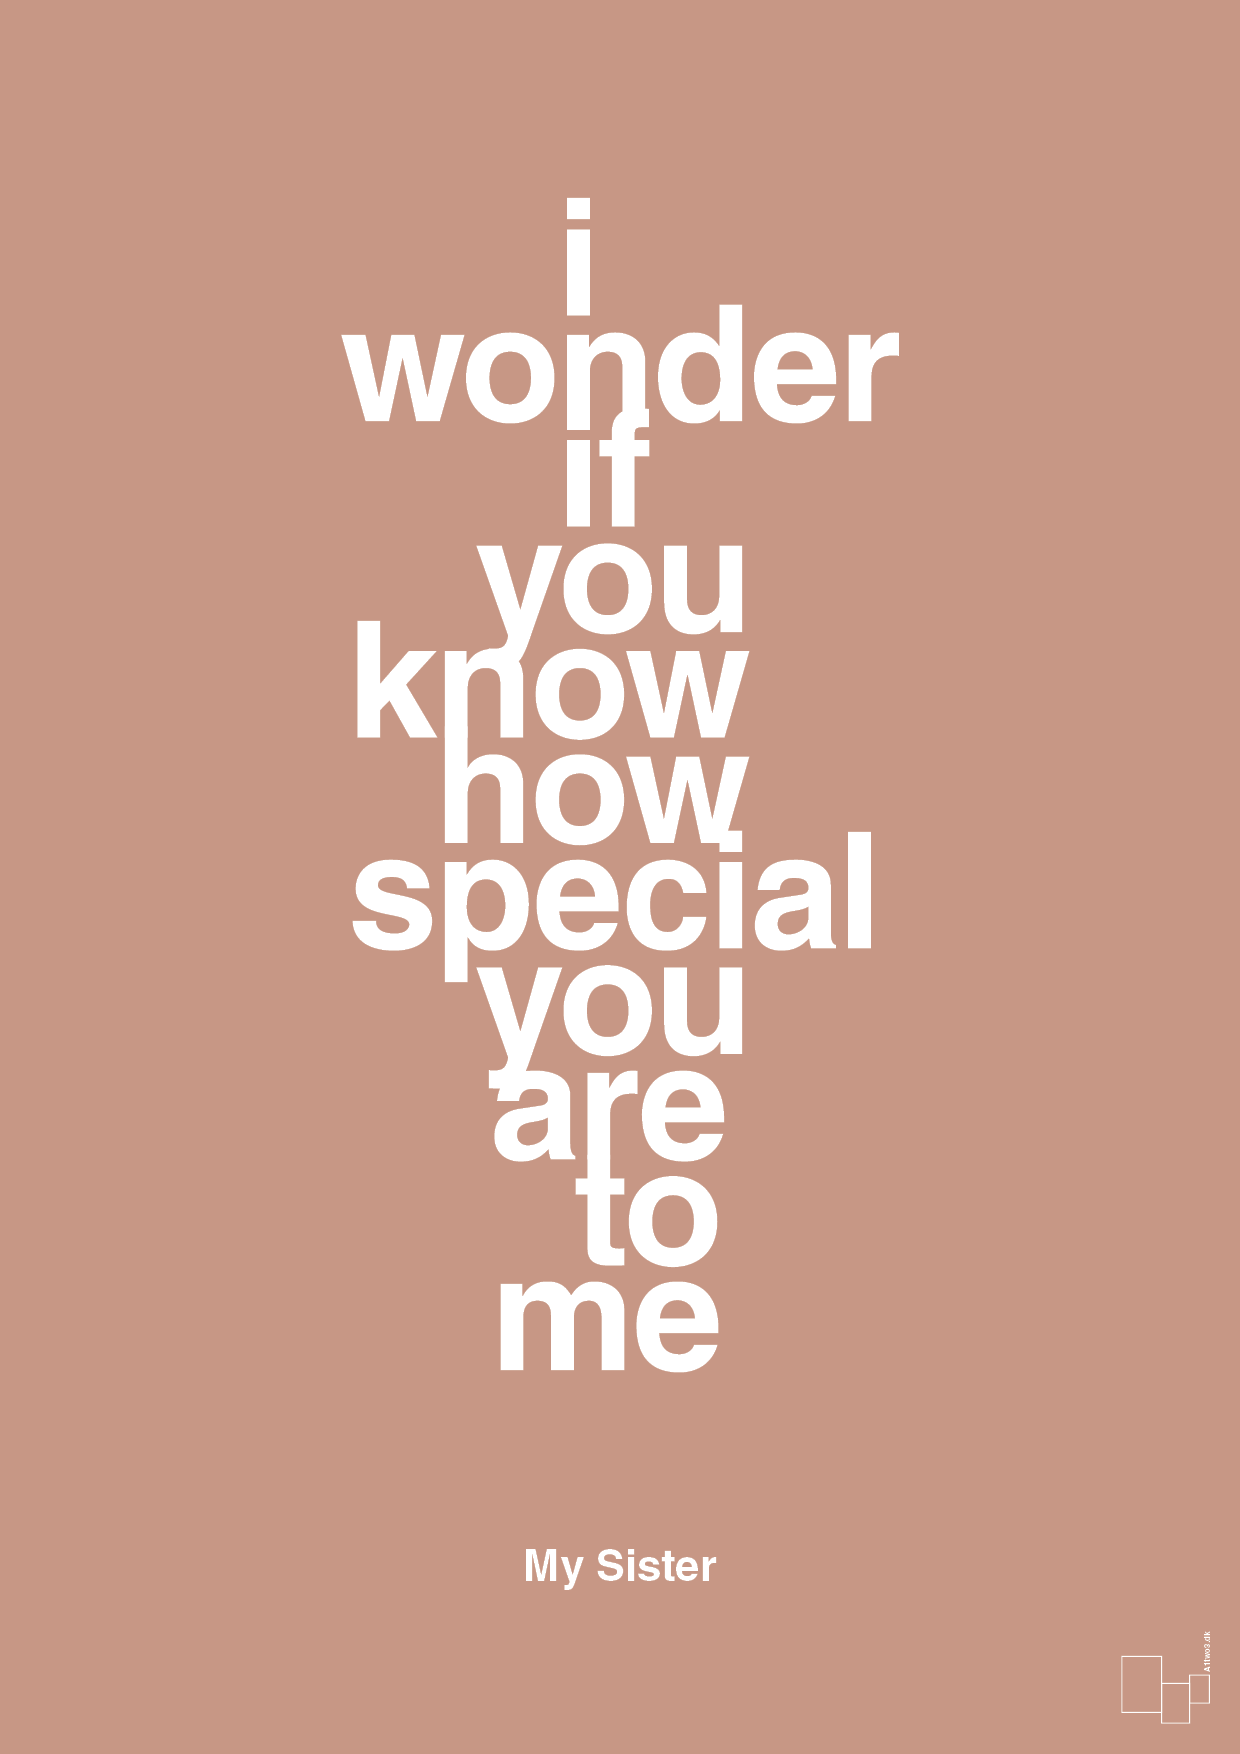 my sister - i wonder if you know how special you are to me - Plakat med Citater i Powder